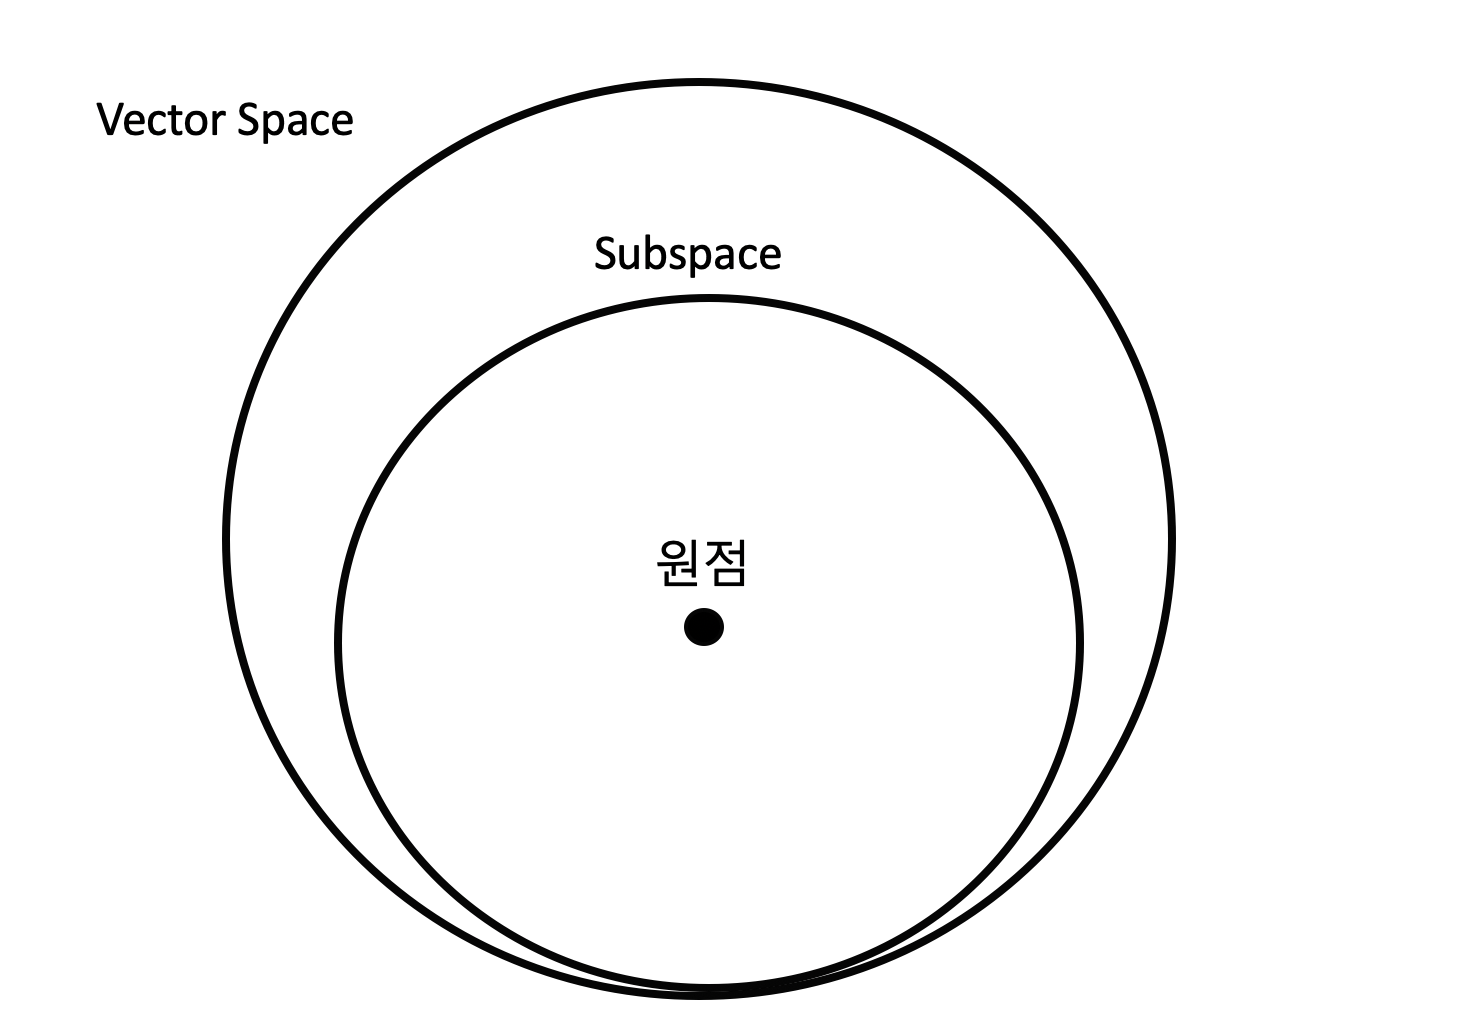 Vector Space, Subspace 그리고 원점의 관계